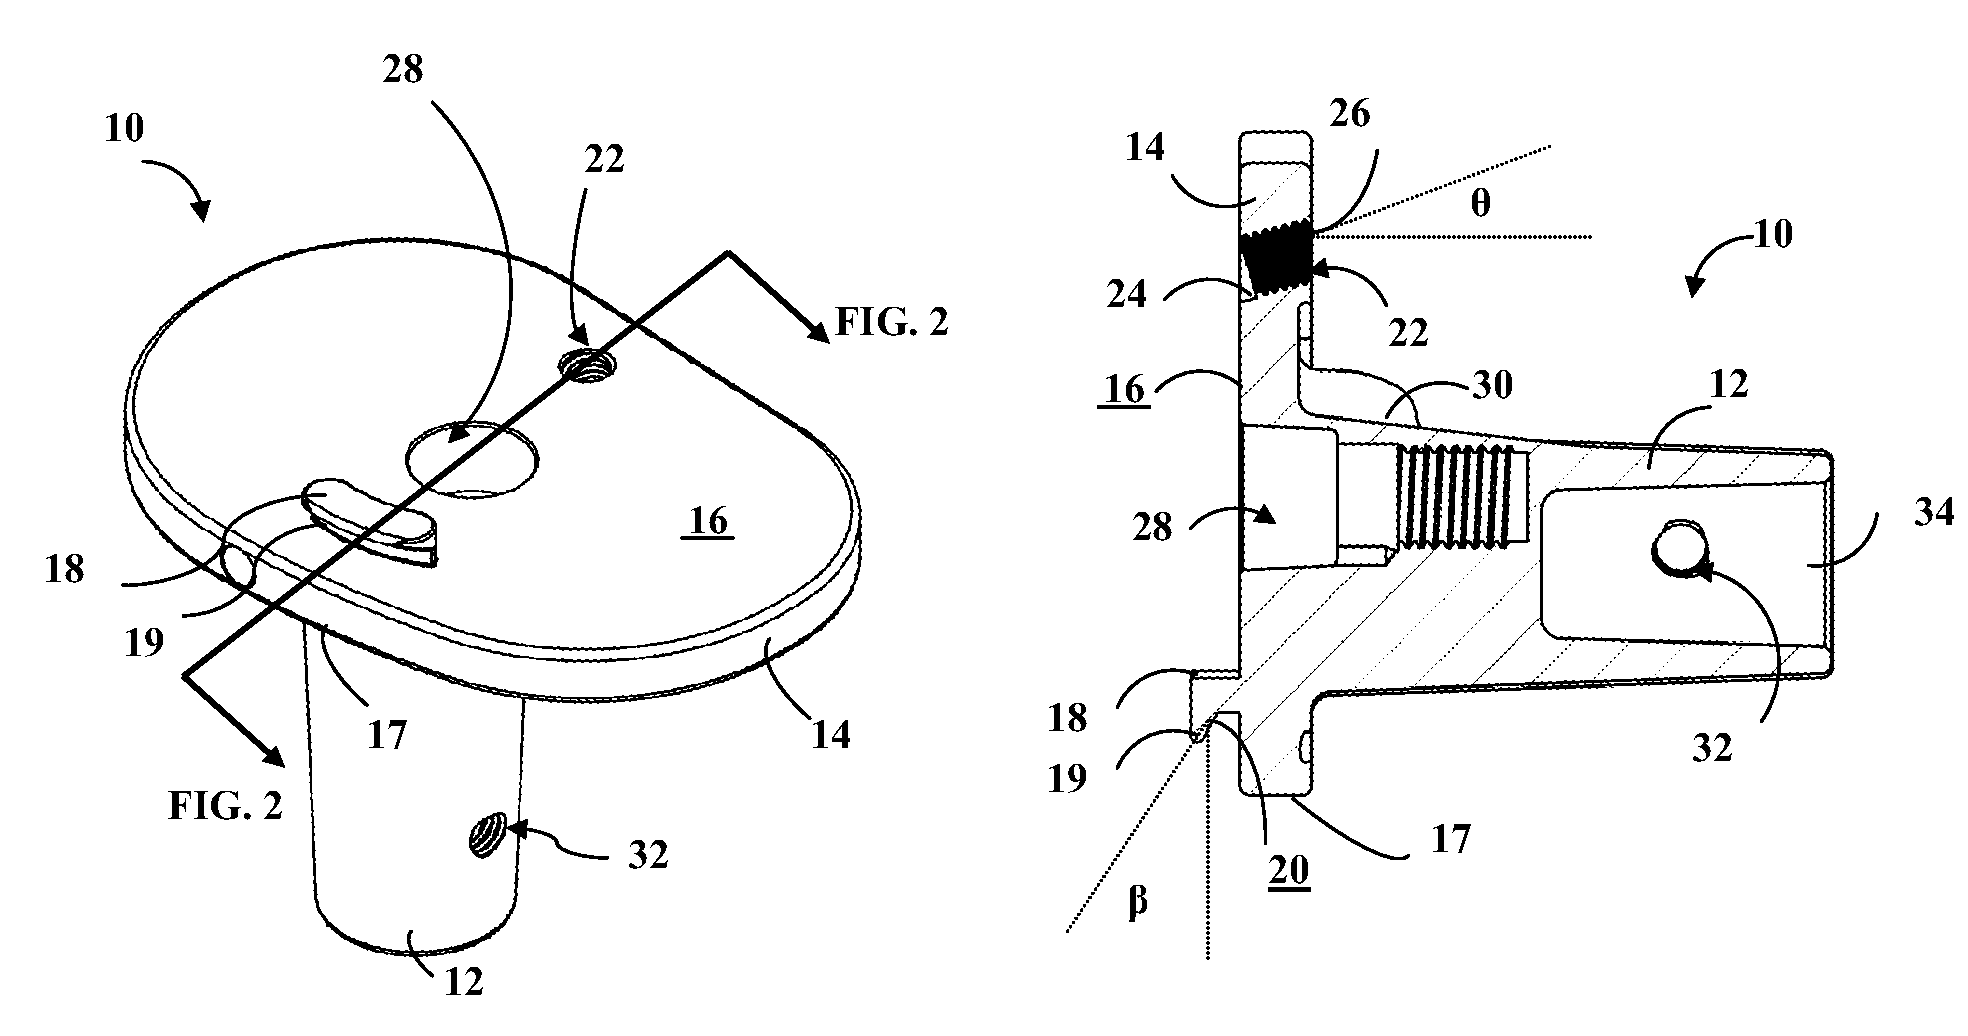 Orthopaedic implant system and fasteners for use therein